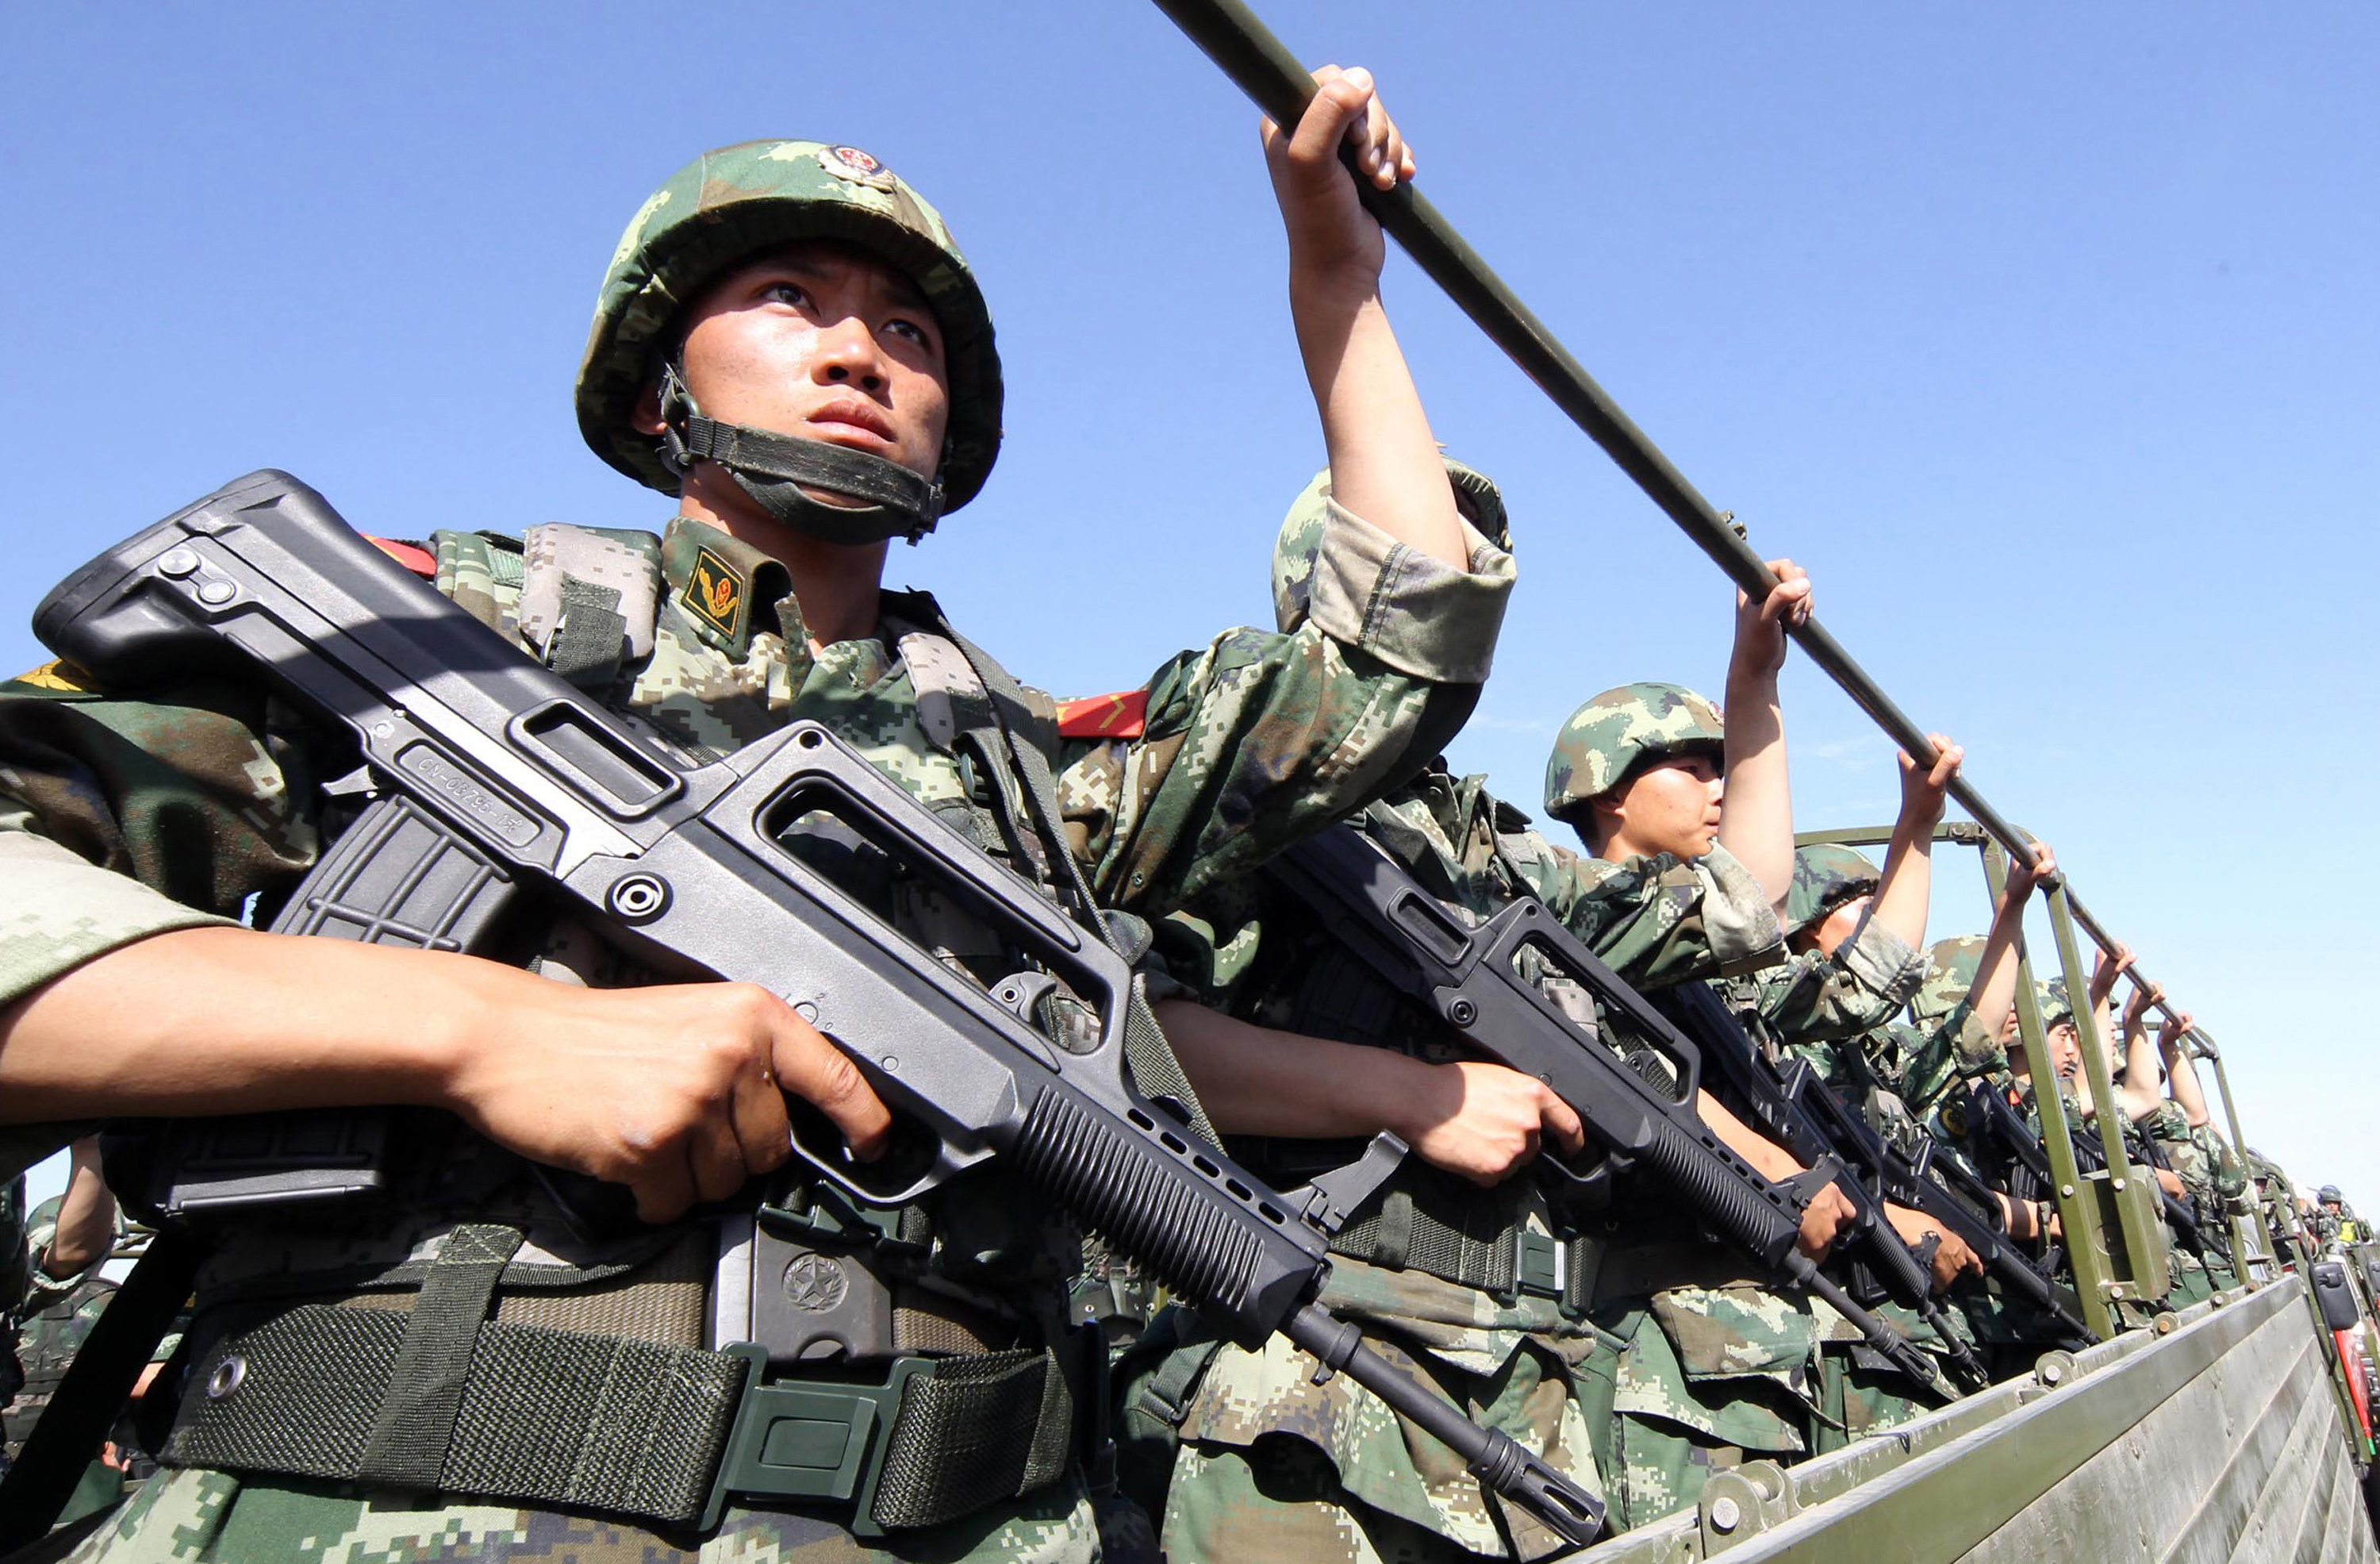 An antiterrorism force including public-security police and the armed police attend an antiterrorism joint exercise in Hami, northwest China's Xinjiang region, on July 2, 2013 (AFP/Getty Images)